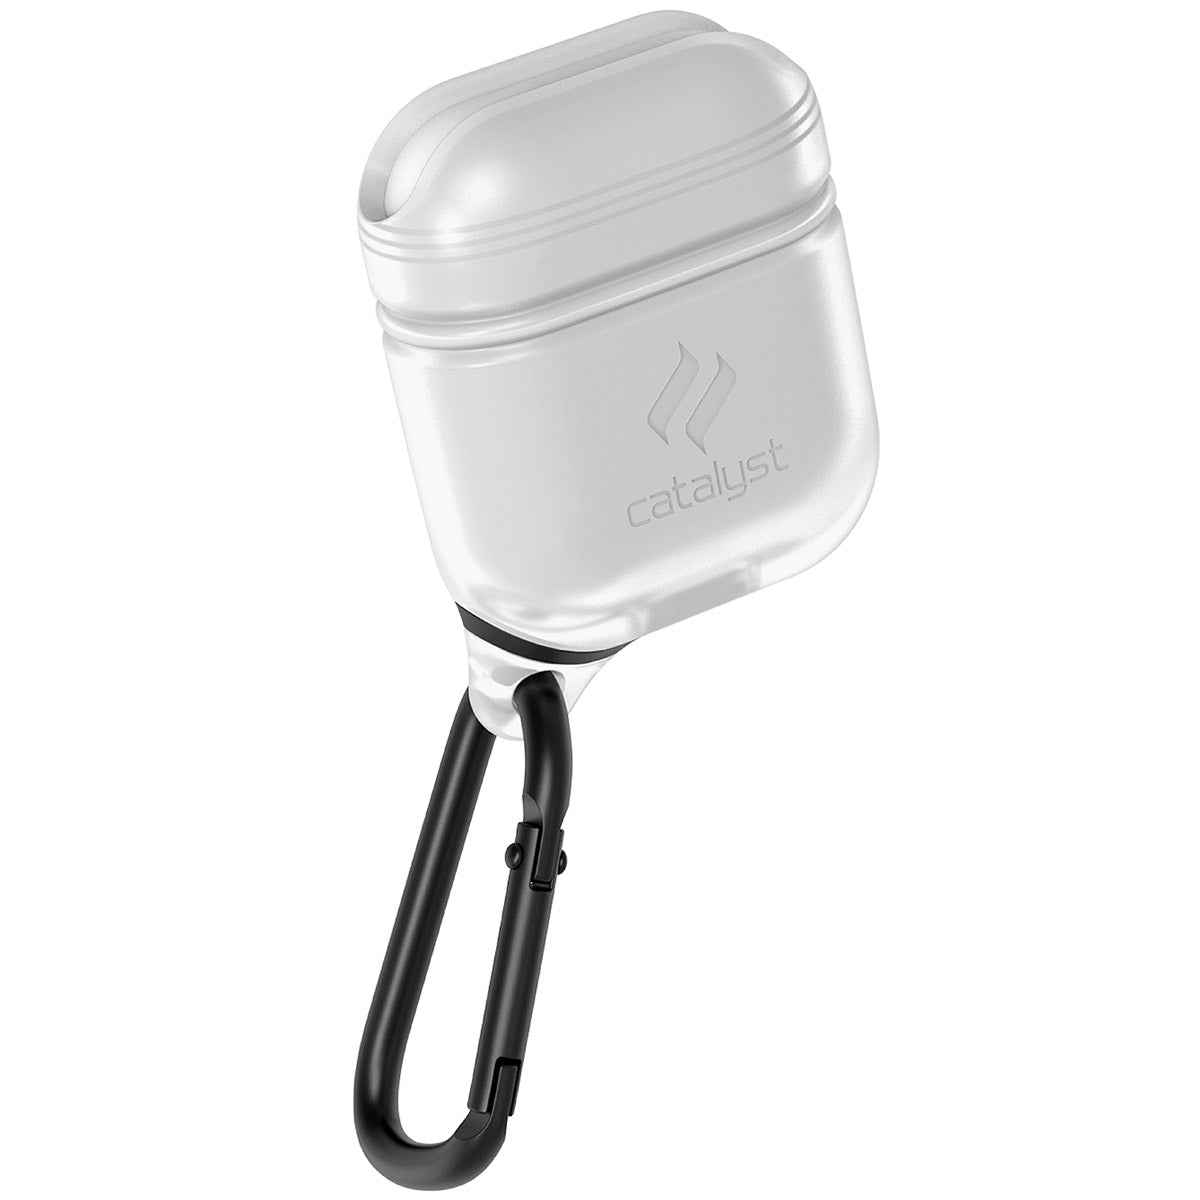 CATAPDWHT-FBA | Catalyst airpods gen2/1 waterproof case + carabiner showing the front view of the case in frost white